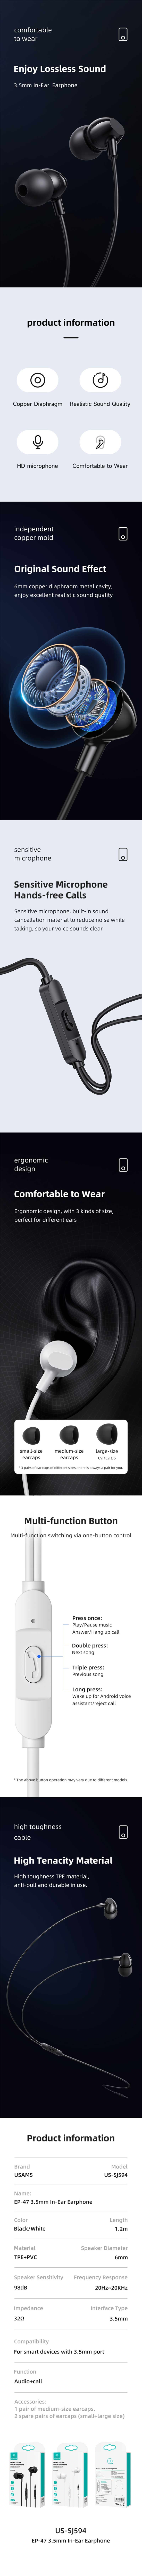 USAMS EP-47 Wired Earphone 6mm Copper Diaphragm Metal Cavity Hands-free Call 3.5mm Ergonomics In-ear Wired Headphone with Mic